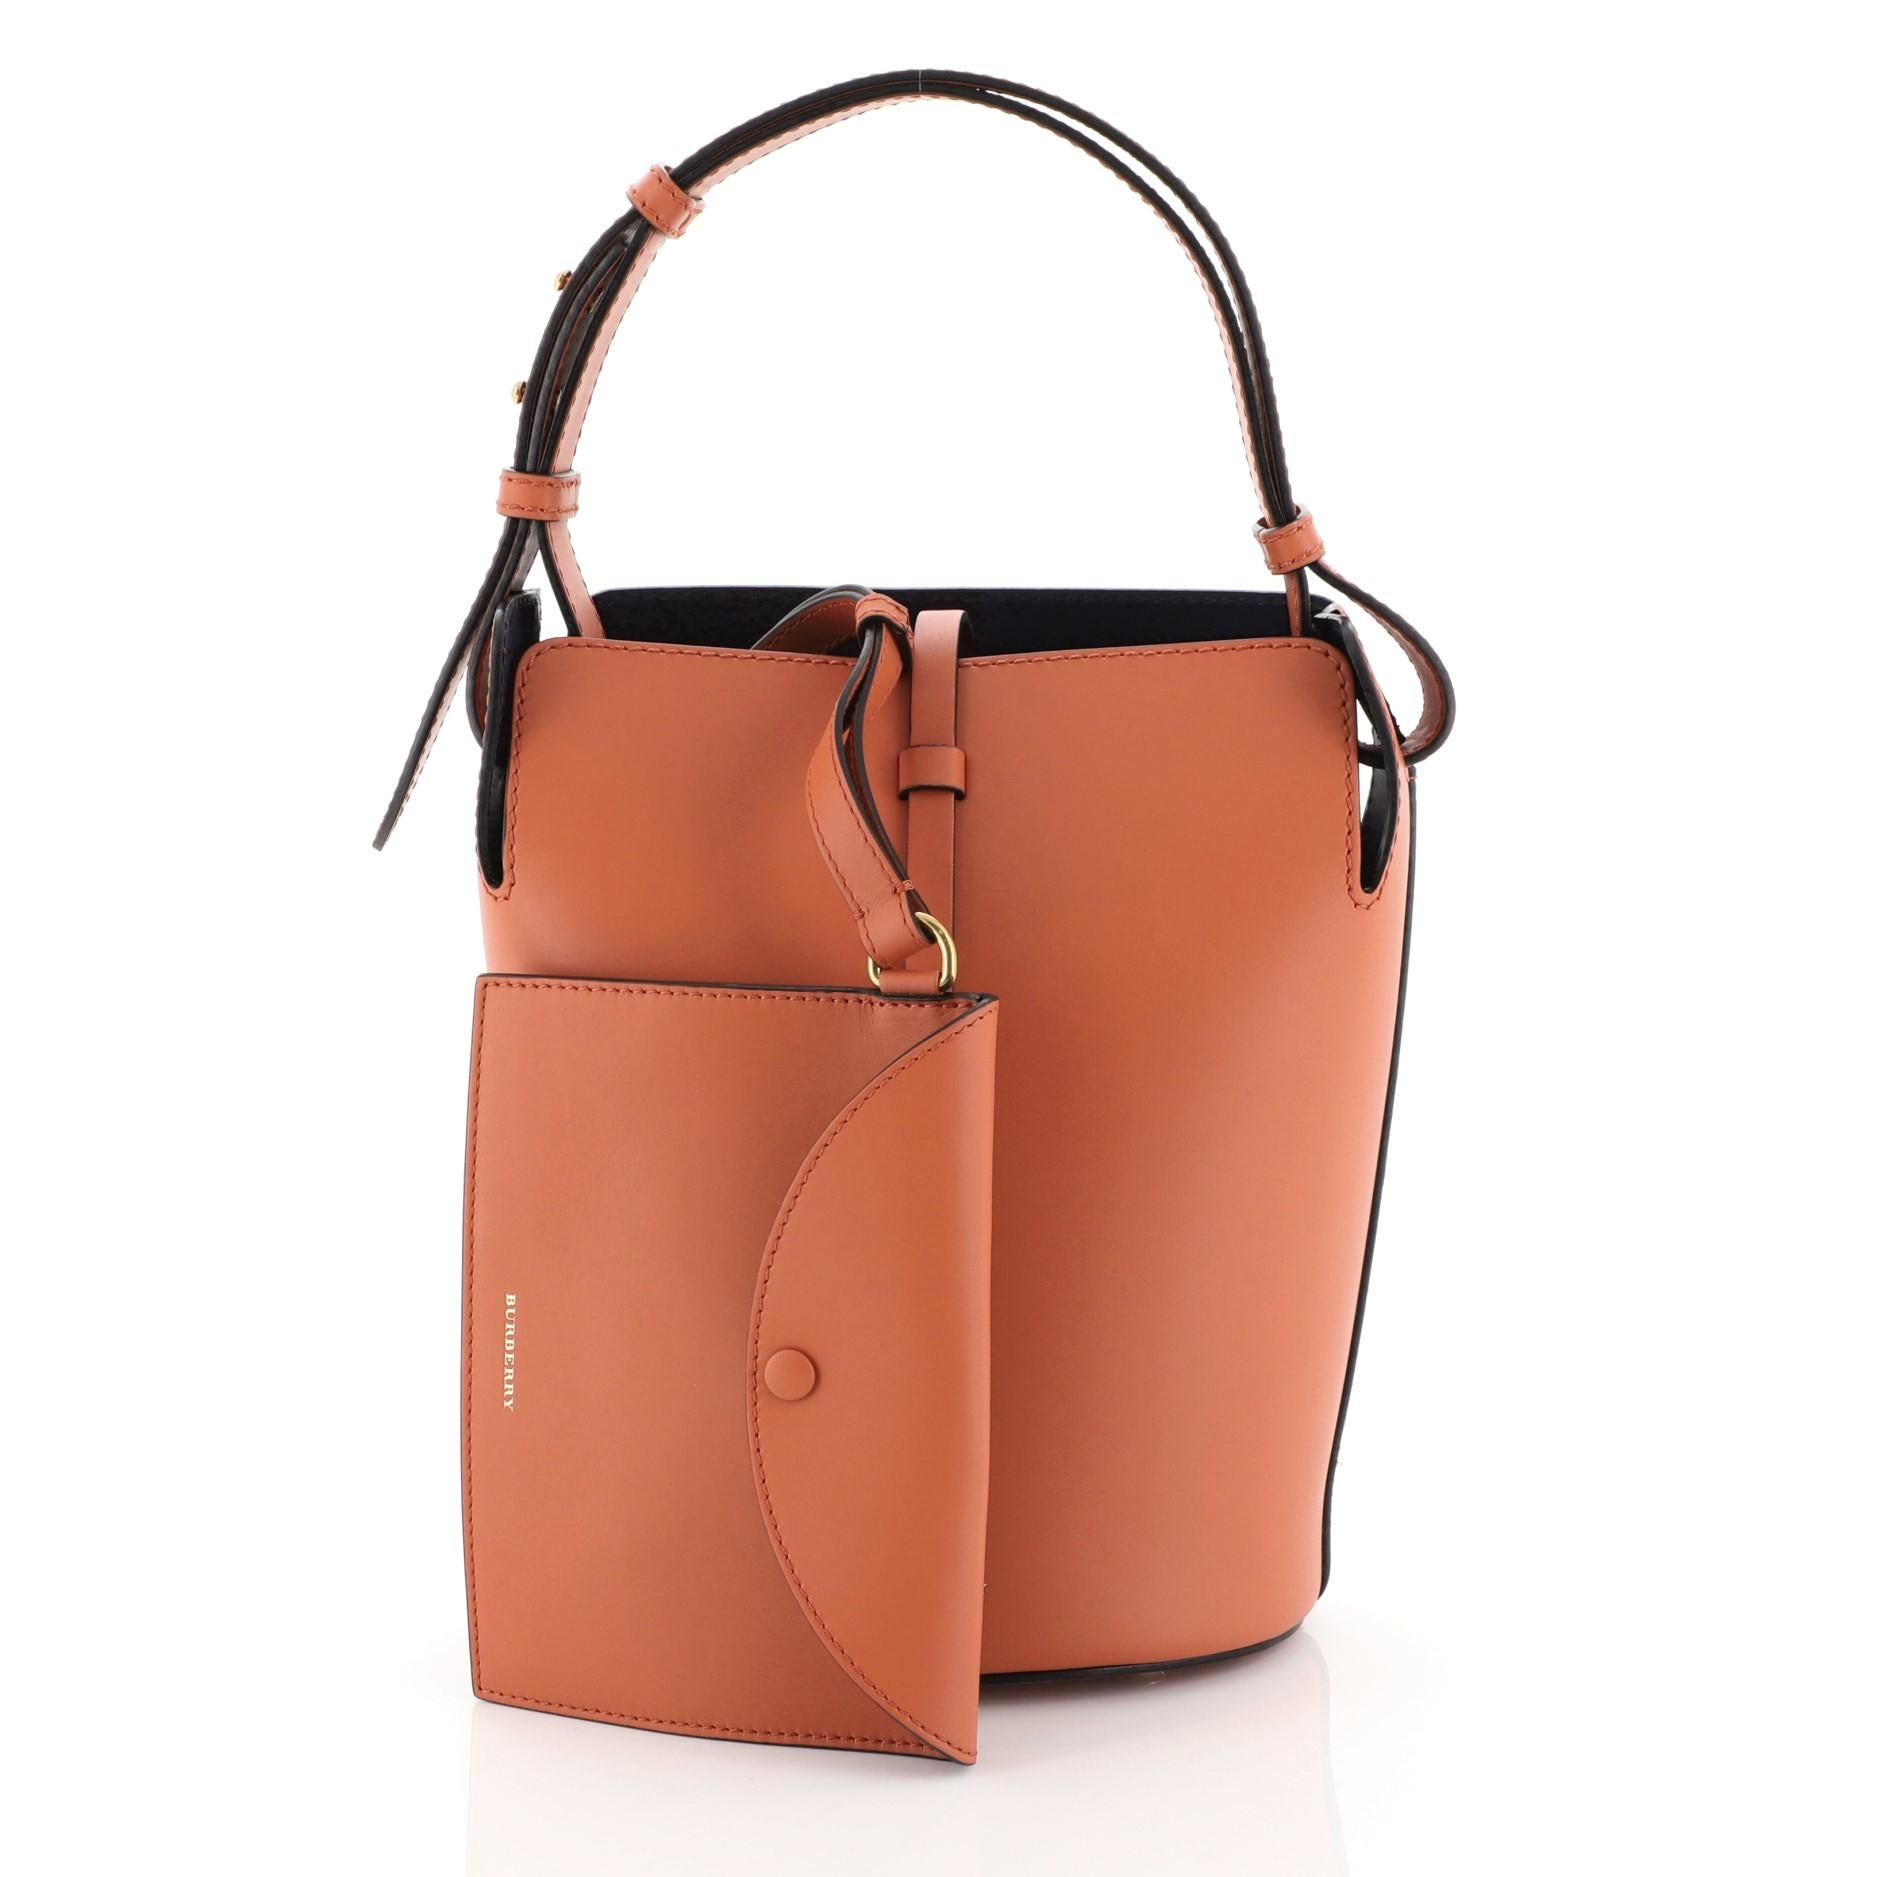 This Burberry Supple Bucket Bag Leather Medium, crafted from orange leather, features adjustable flat shoulder strap and aged gold-tone hardware. It opens to a blue leather interior.

Estimated Retail Price: $1,890
Condition: Excellent. Minor